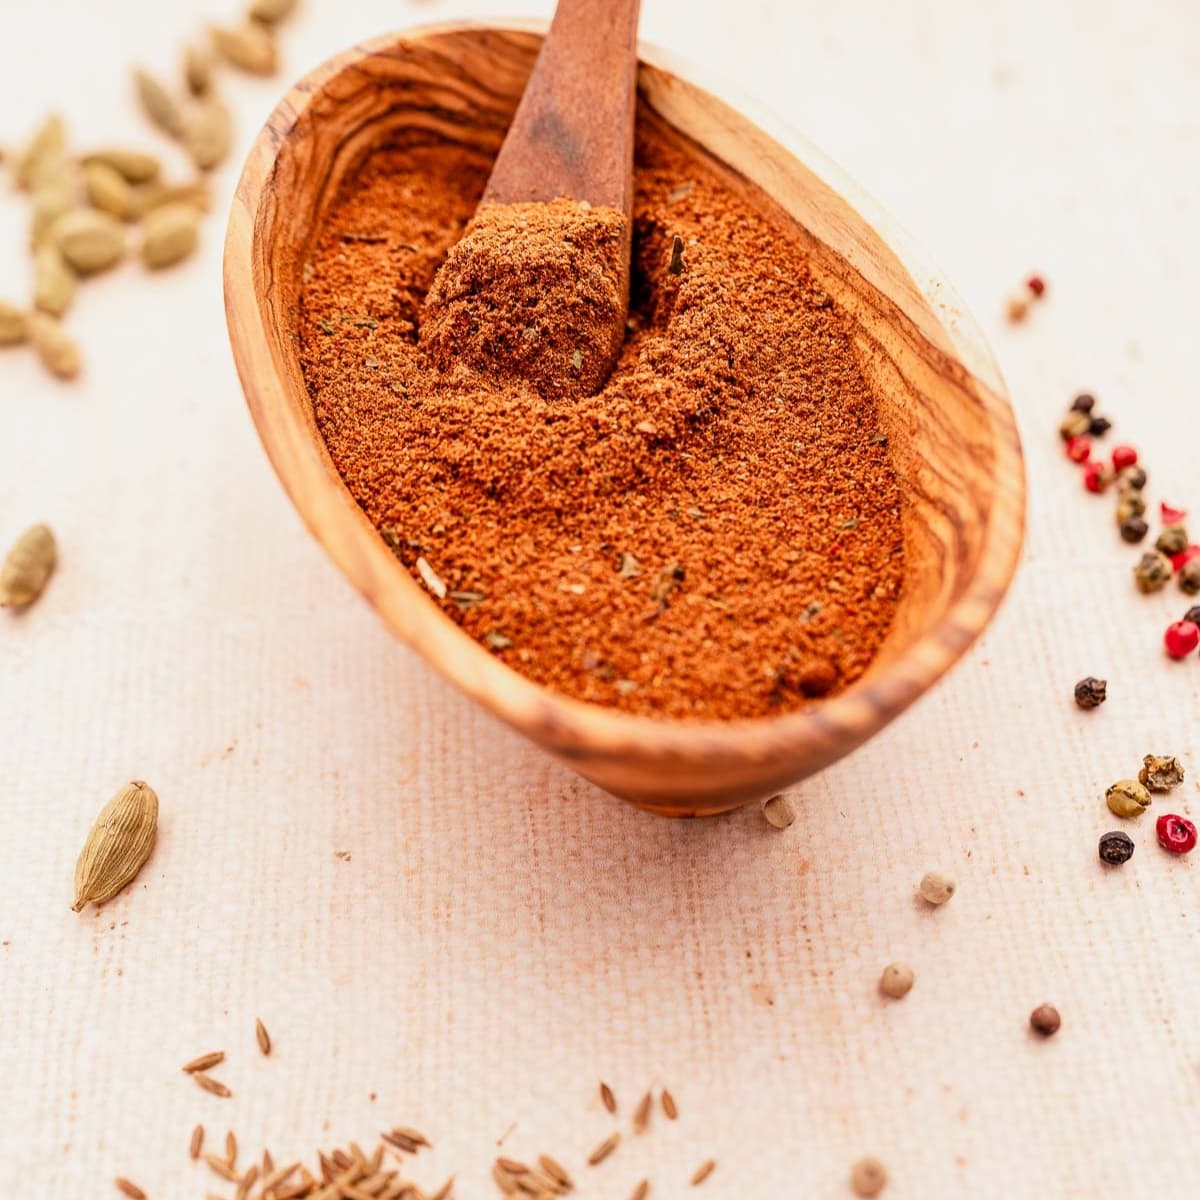 A shallow wooden bowl filled with Baharat Spice.